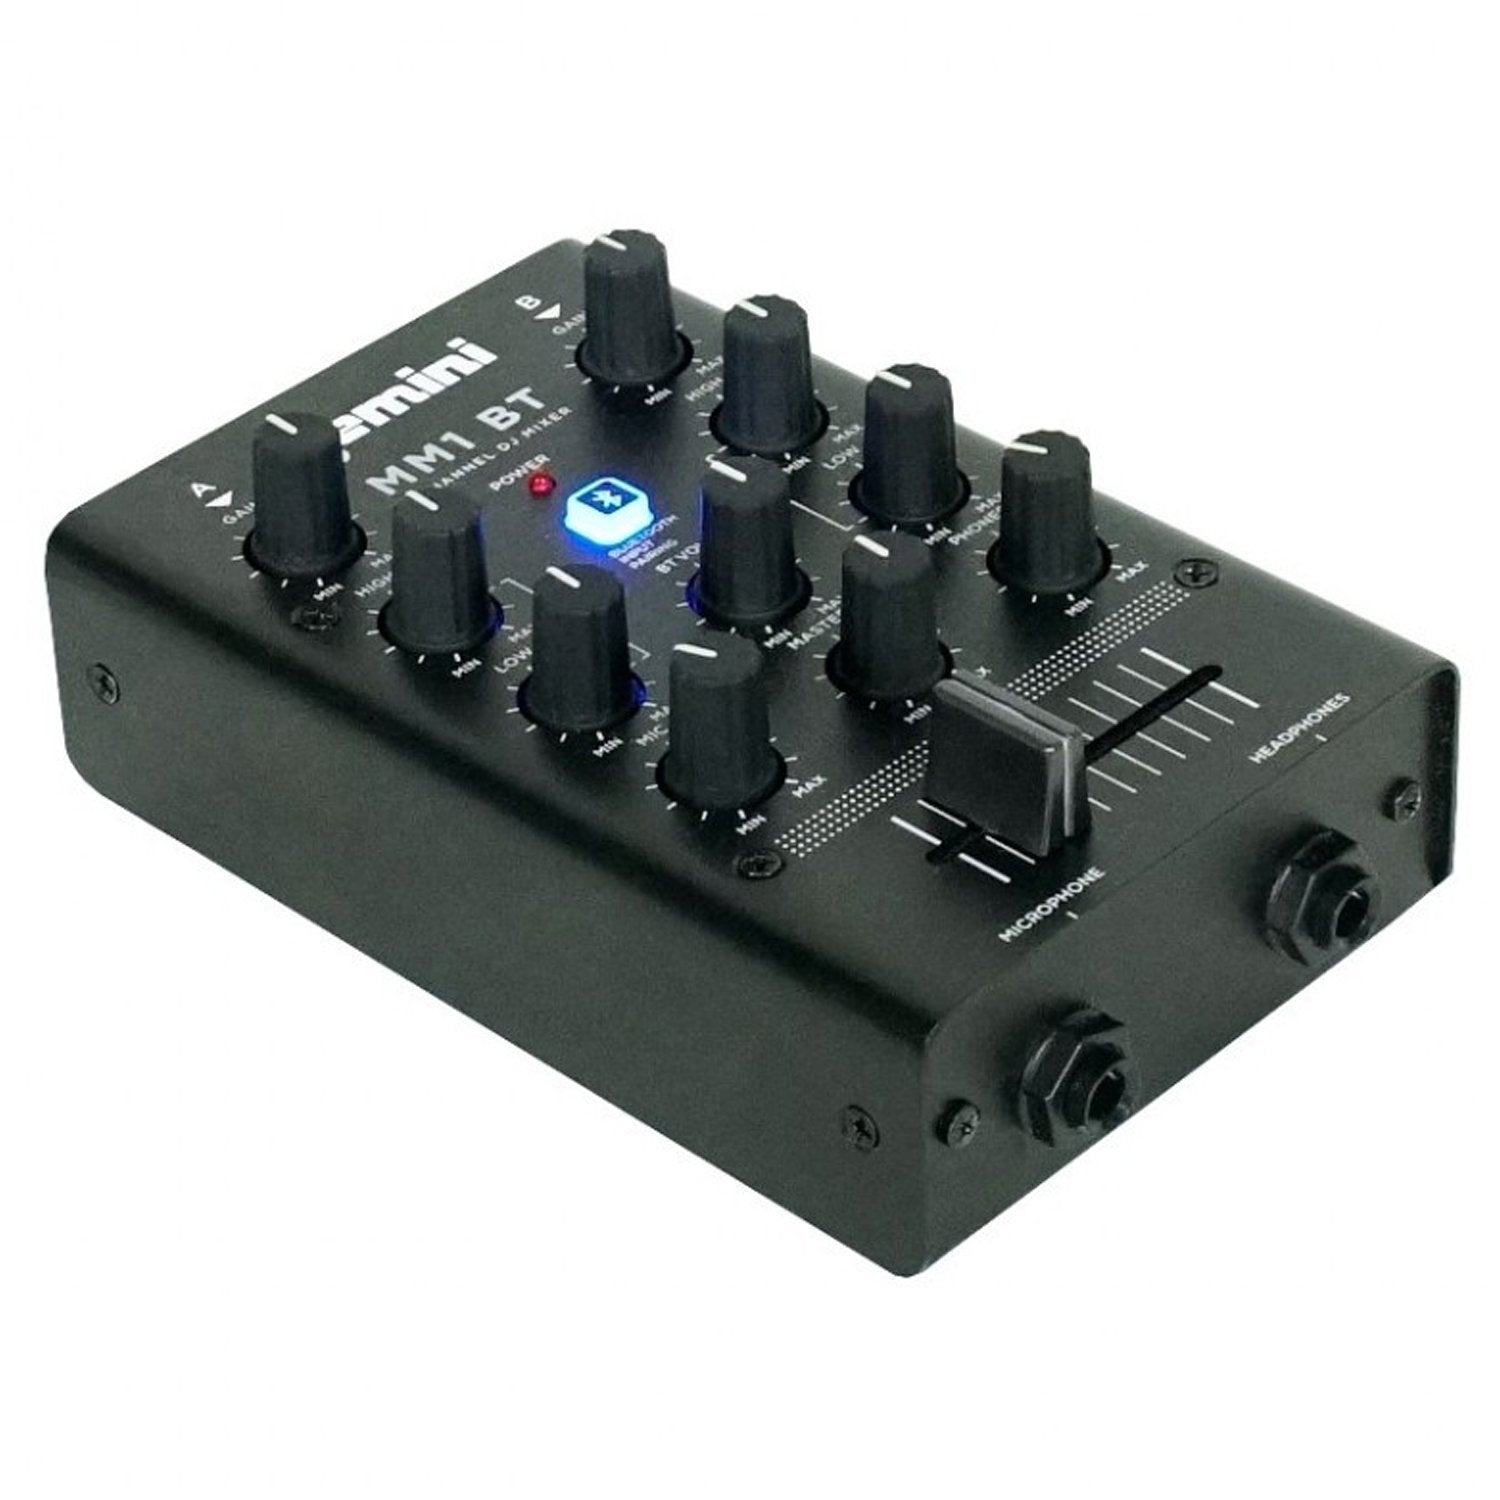 Gemini MM1BT 2-Channel Professional Analog DJ Mixer with Bluetooth - DY Pro Audio